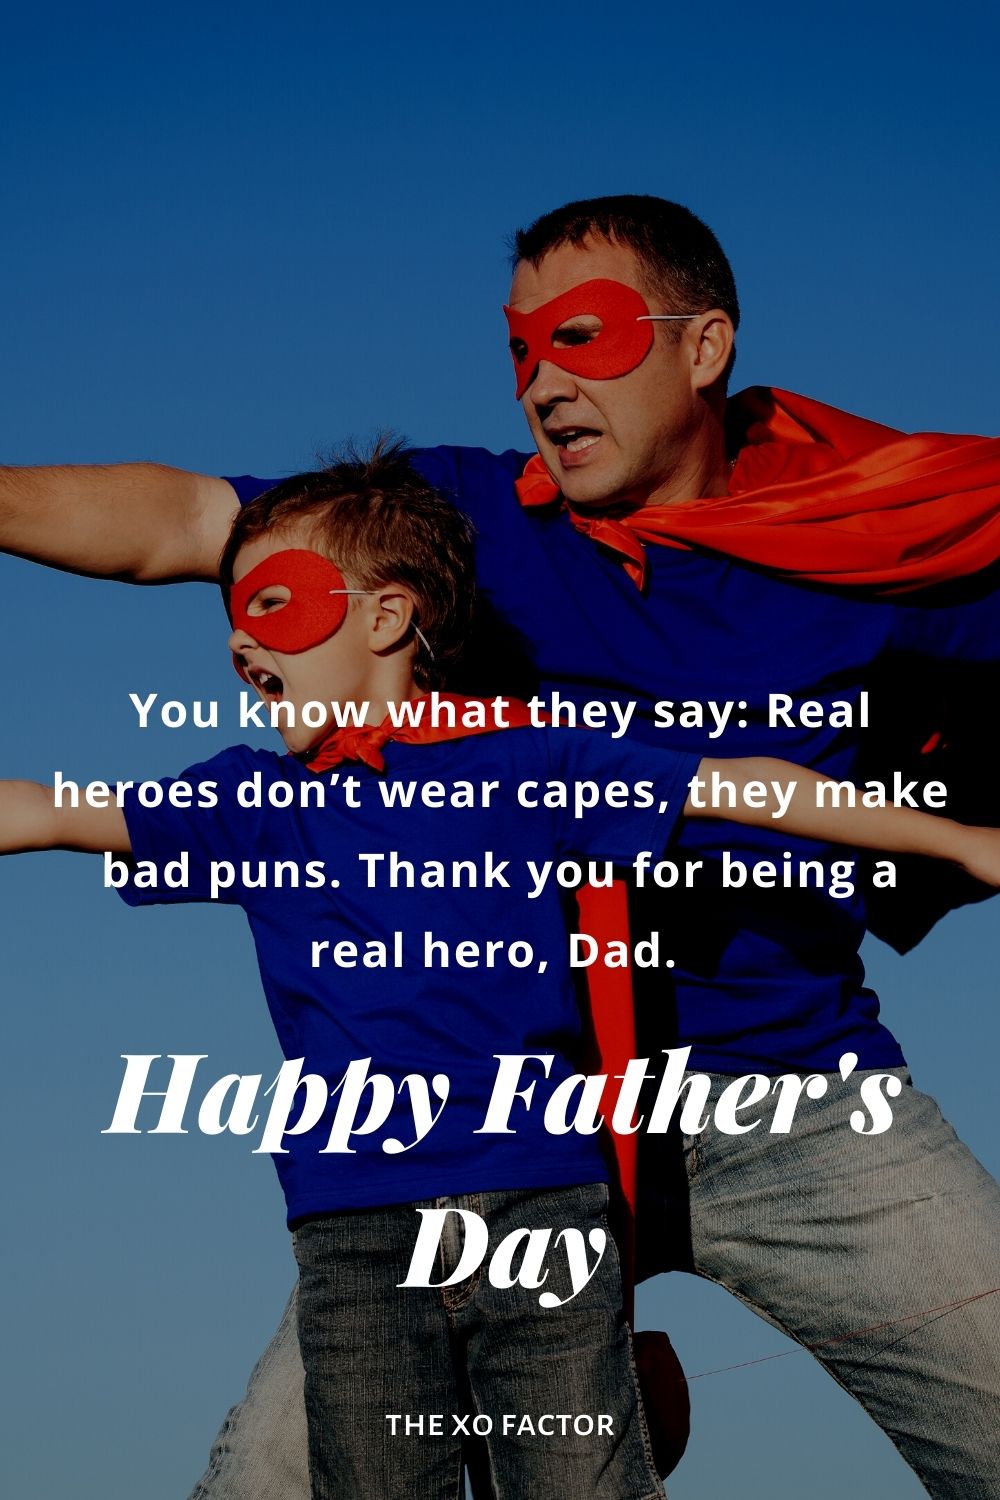 You know what they say: Real heroes don’t wear capes, they make bad puns. Thank you for being a real hero, Dad. Happy father’s day!